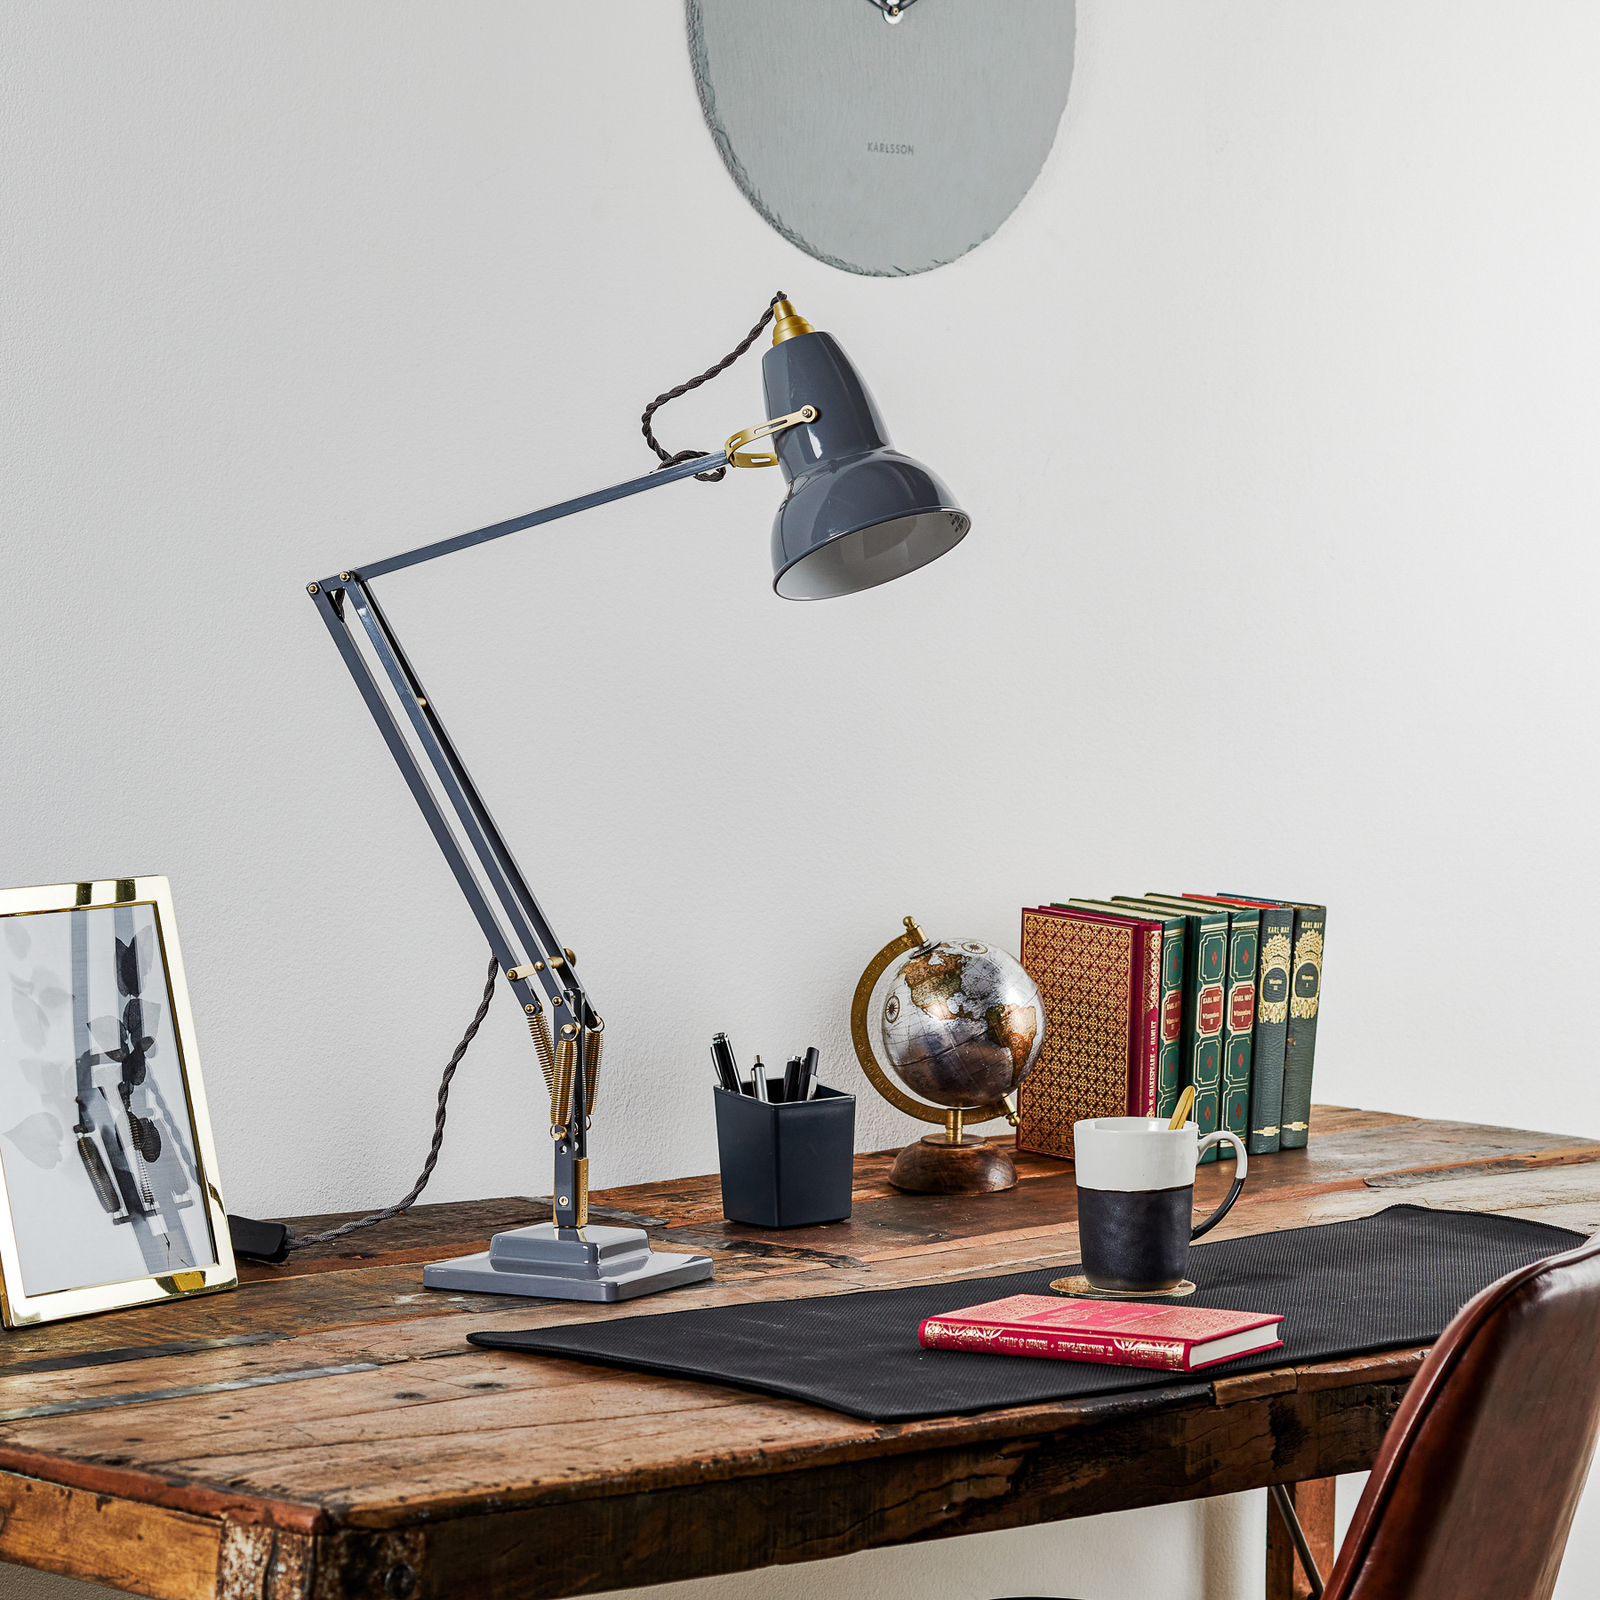 Anglepoise Original 1227 Brass lampe poser grise